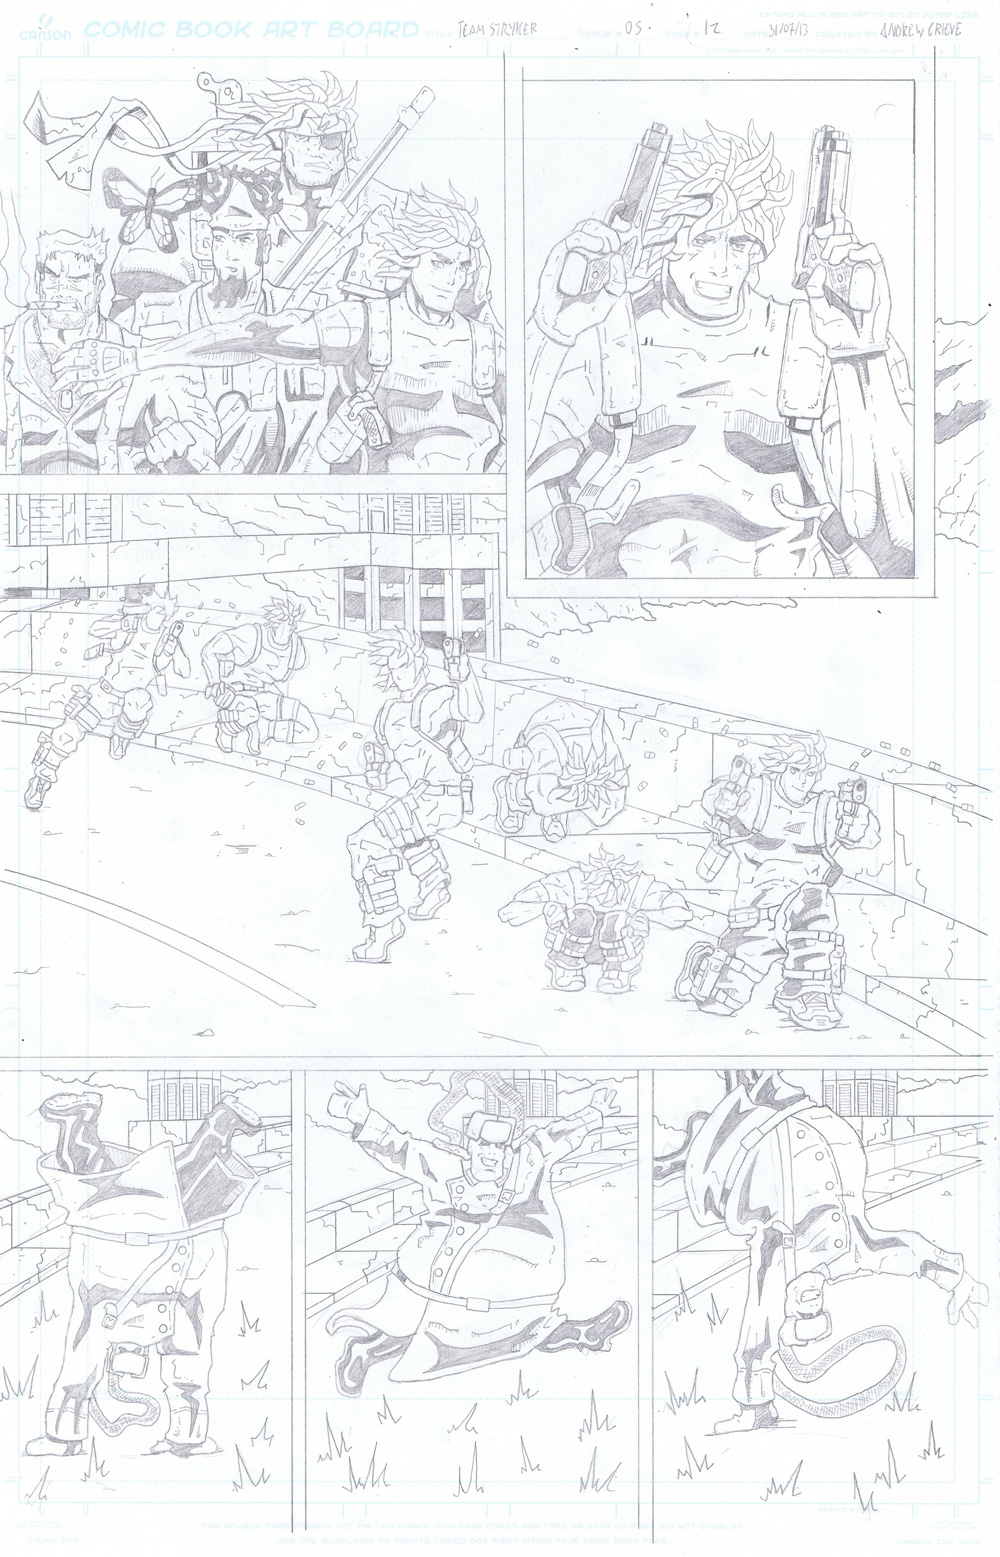 MISSION 005: PAGE 12 PENCIL